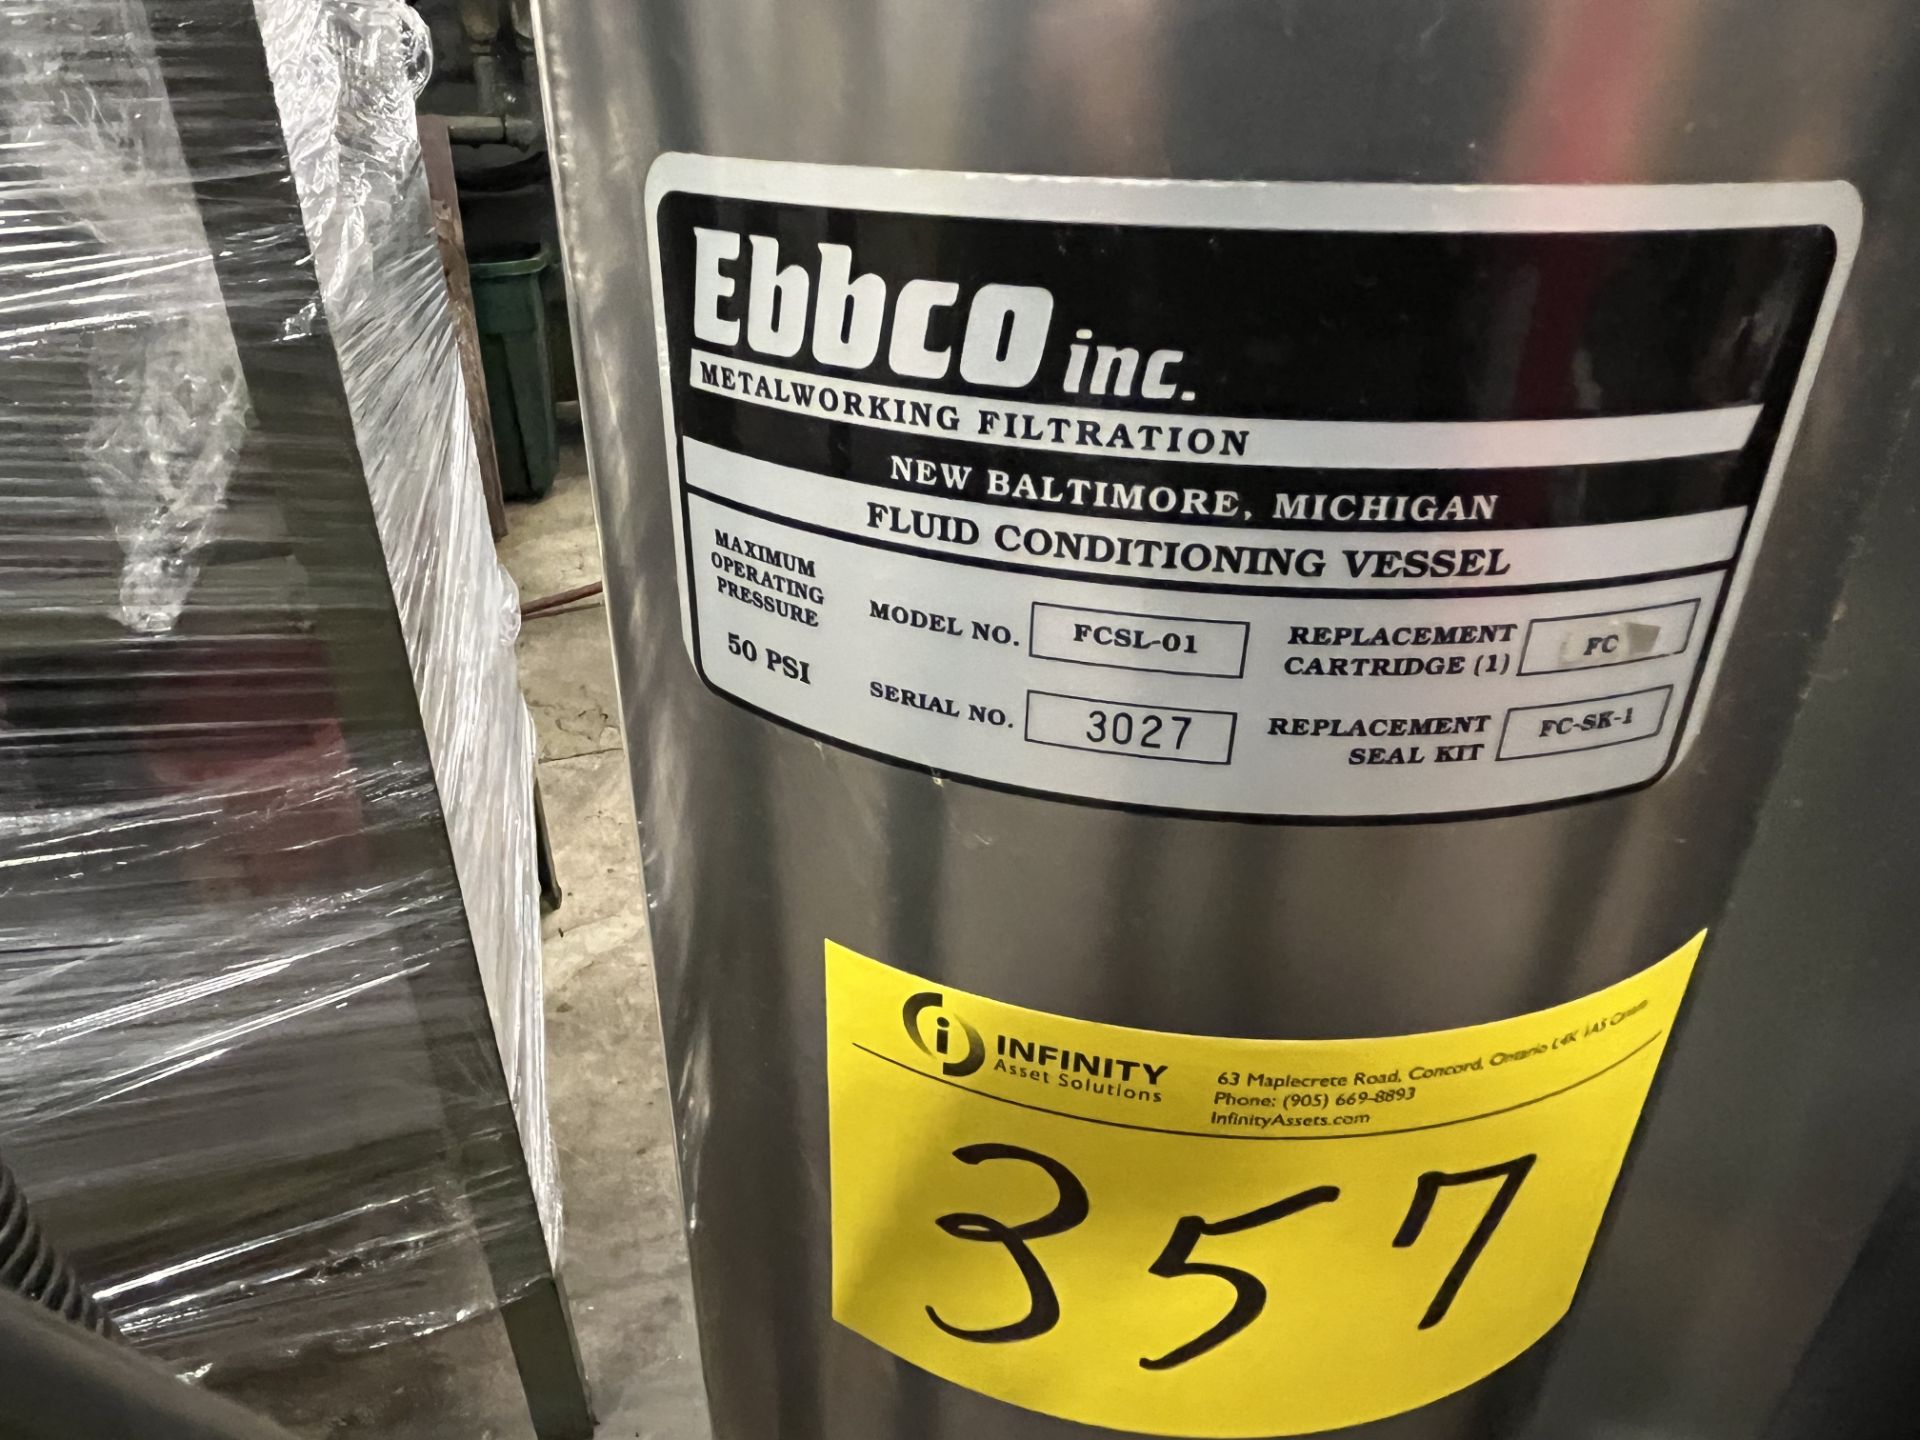 EBBCO INC. FCSL-01 FLUID CONDITIONING VESSEL, ETC. (LOCATED AT 1761 BISHOP STREET N, CAMBRIDGE, - Image 2 of 5